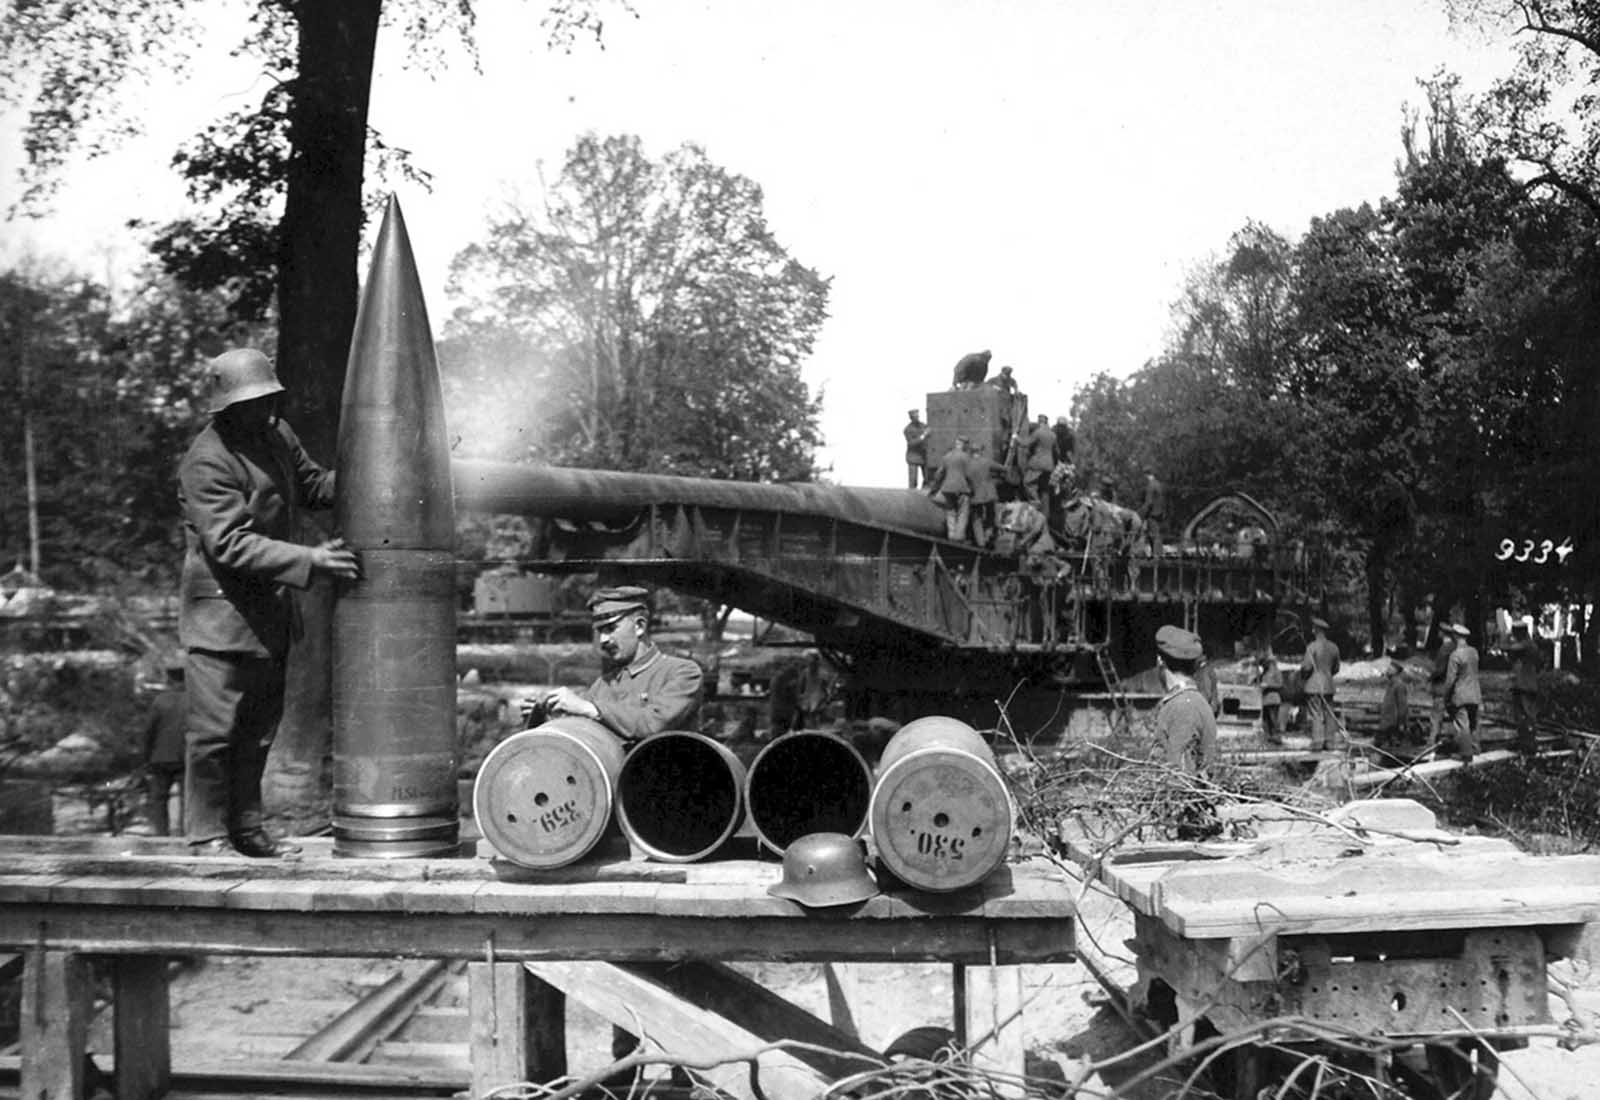 A German soldier rubs down massive shells for the 38 cm SK L/45, or “Langer Max” rapid firing railroad gun, ca. 1918. The Langer Max was originally designed as a battleship weapon, later mounted to armored rail cars, one of many types of railroad artillery used by both sides during the war. The Langer Max could fire a 750 kg (1,650 lb) high explosive projectile up to 34,200 m (37,400 yd).